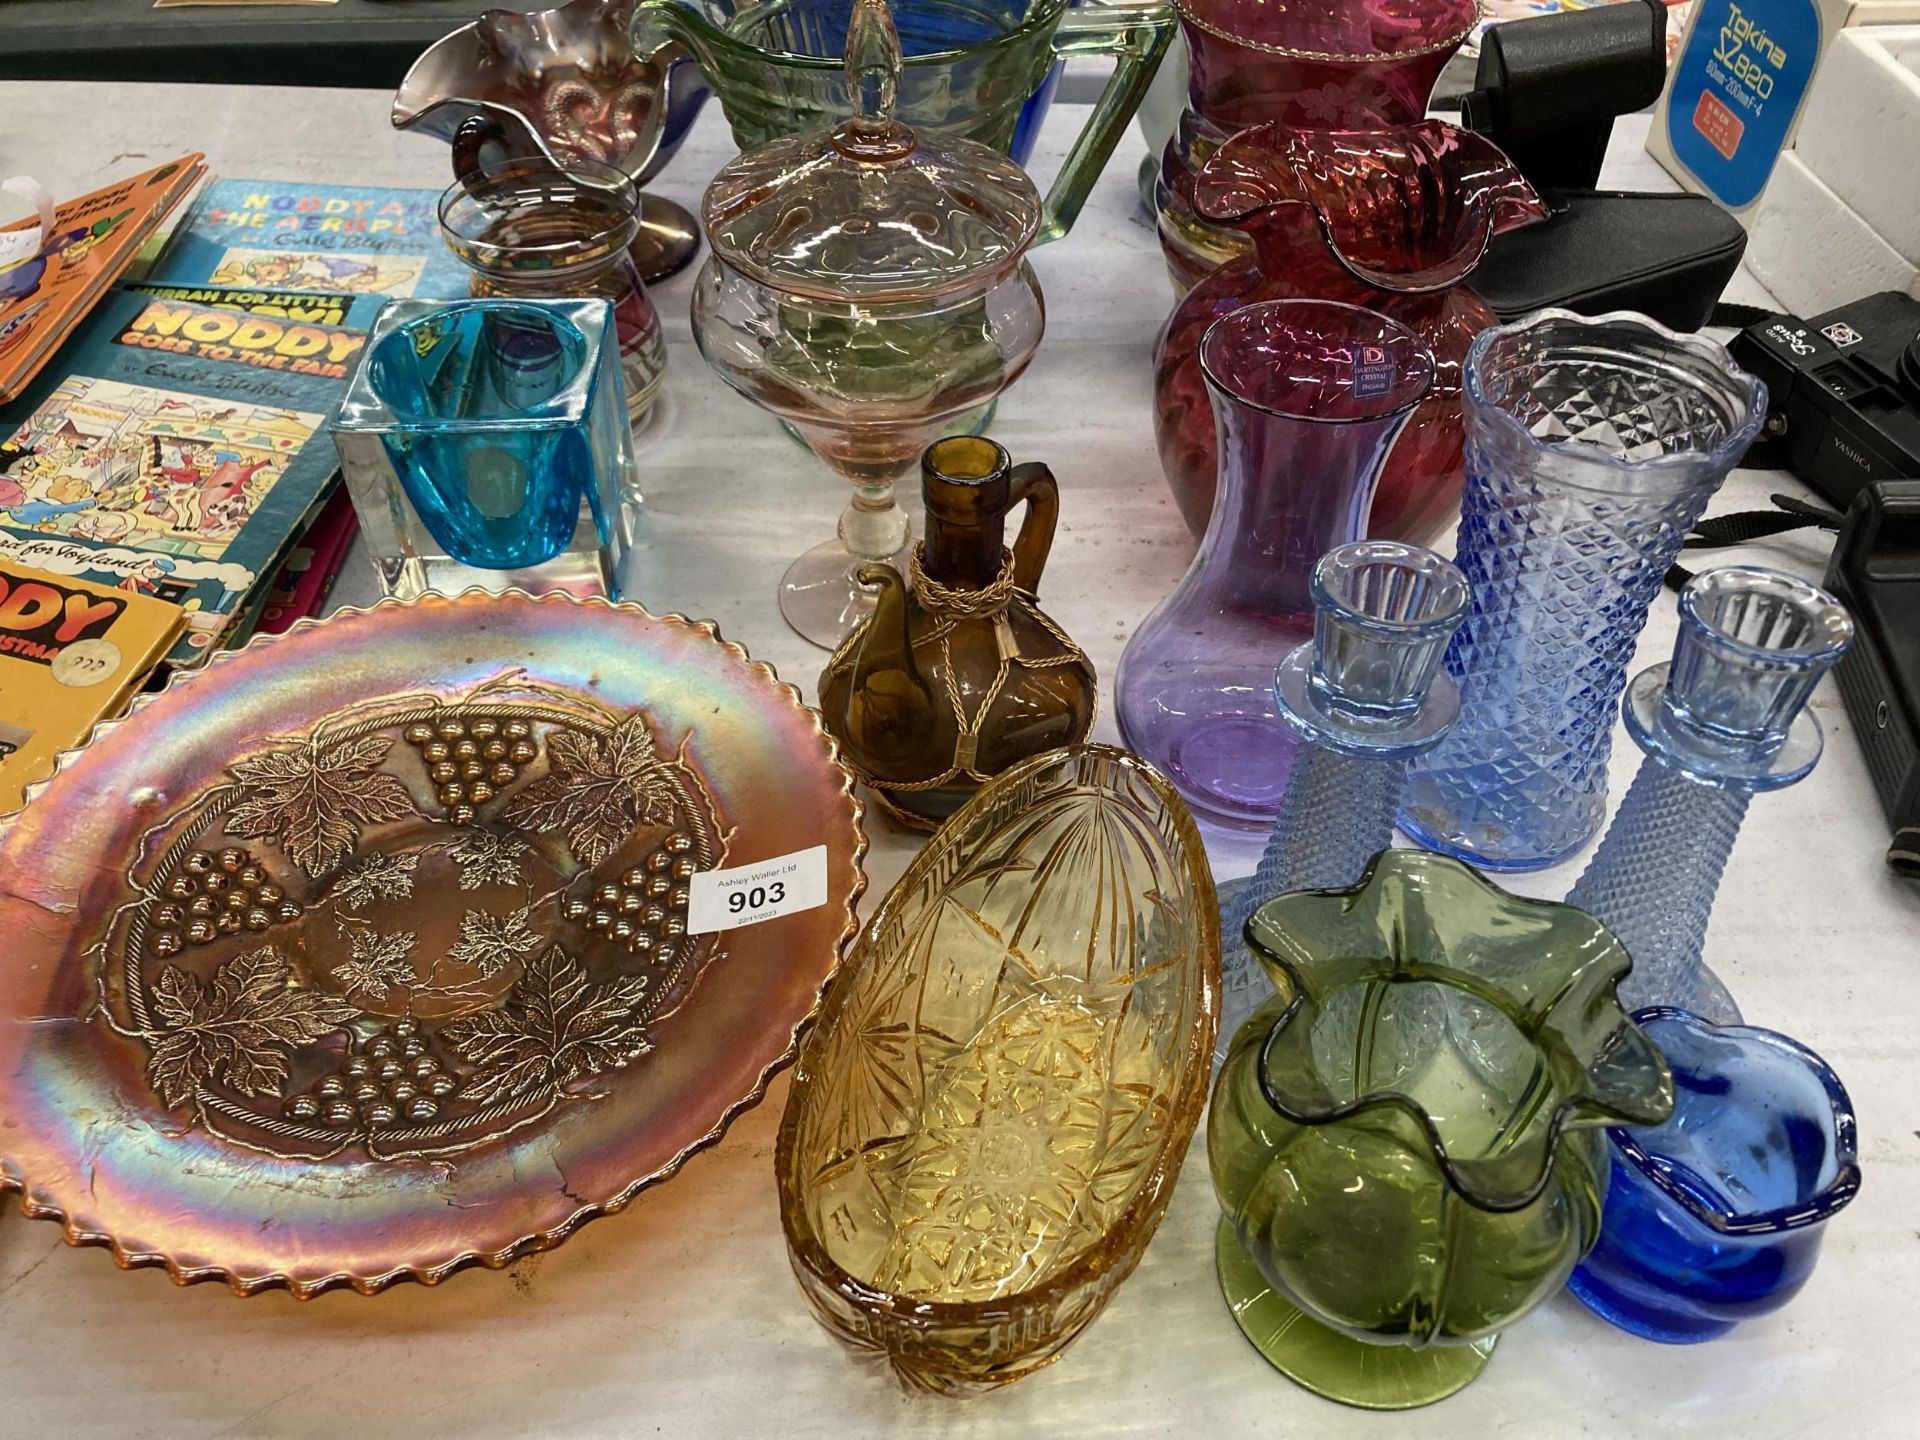 A LARGE QUANTITY OF COLOURED GLASS TO INCLUDE VASES, JUGS, CANDLESTICKS, A BON BON DISH, CARNIVAL - Image 2 of 4